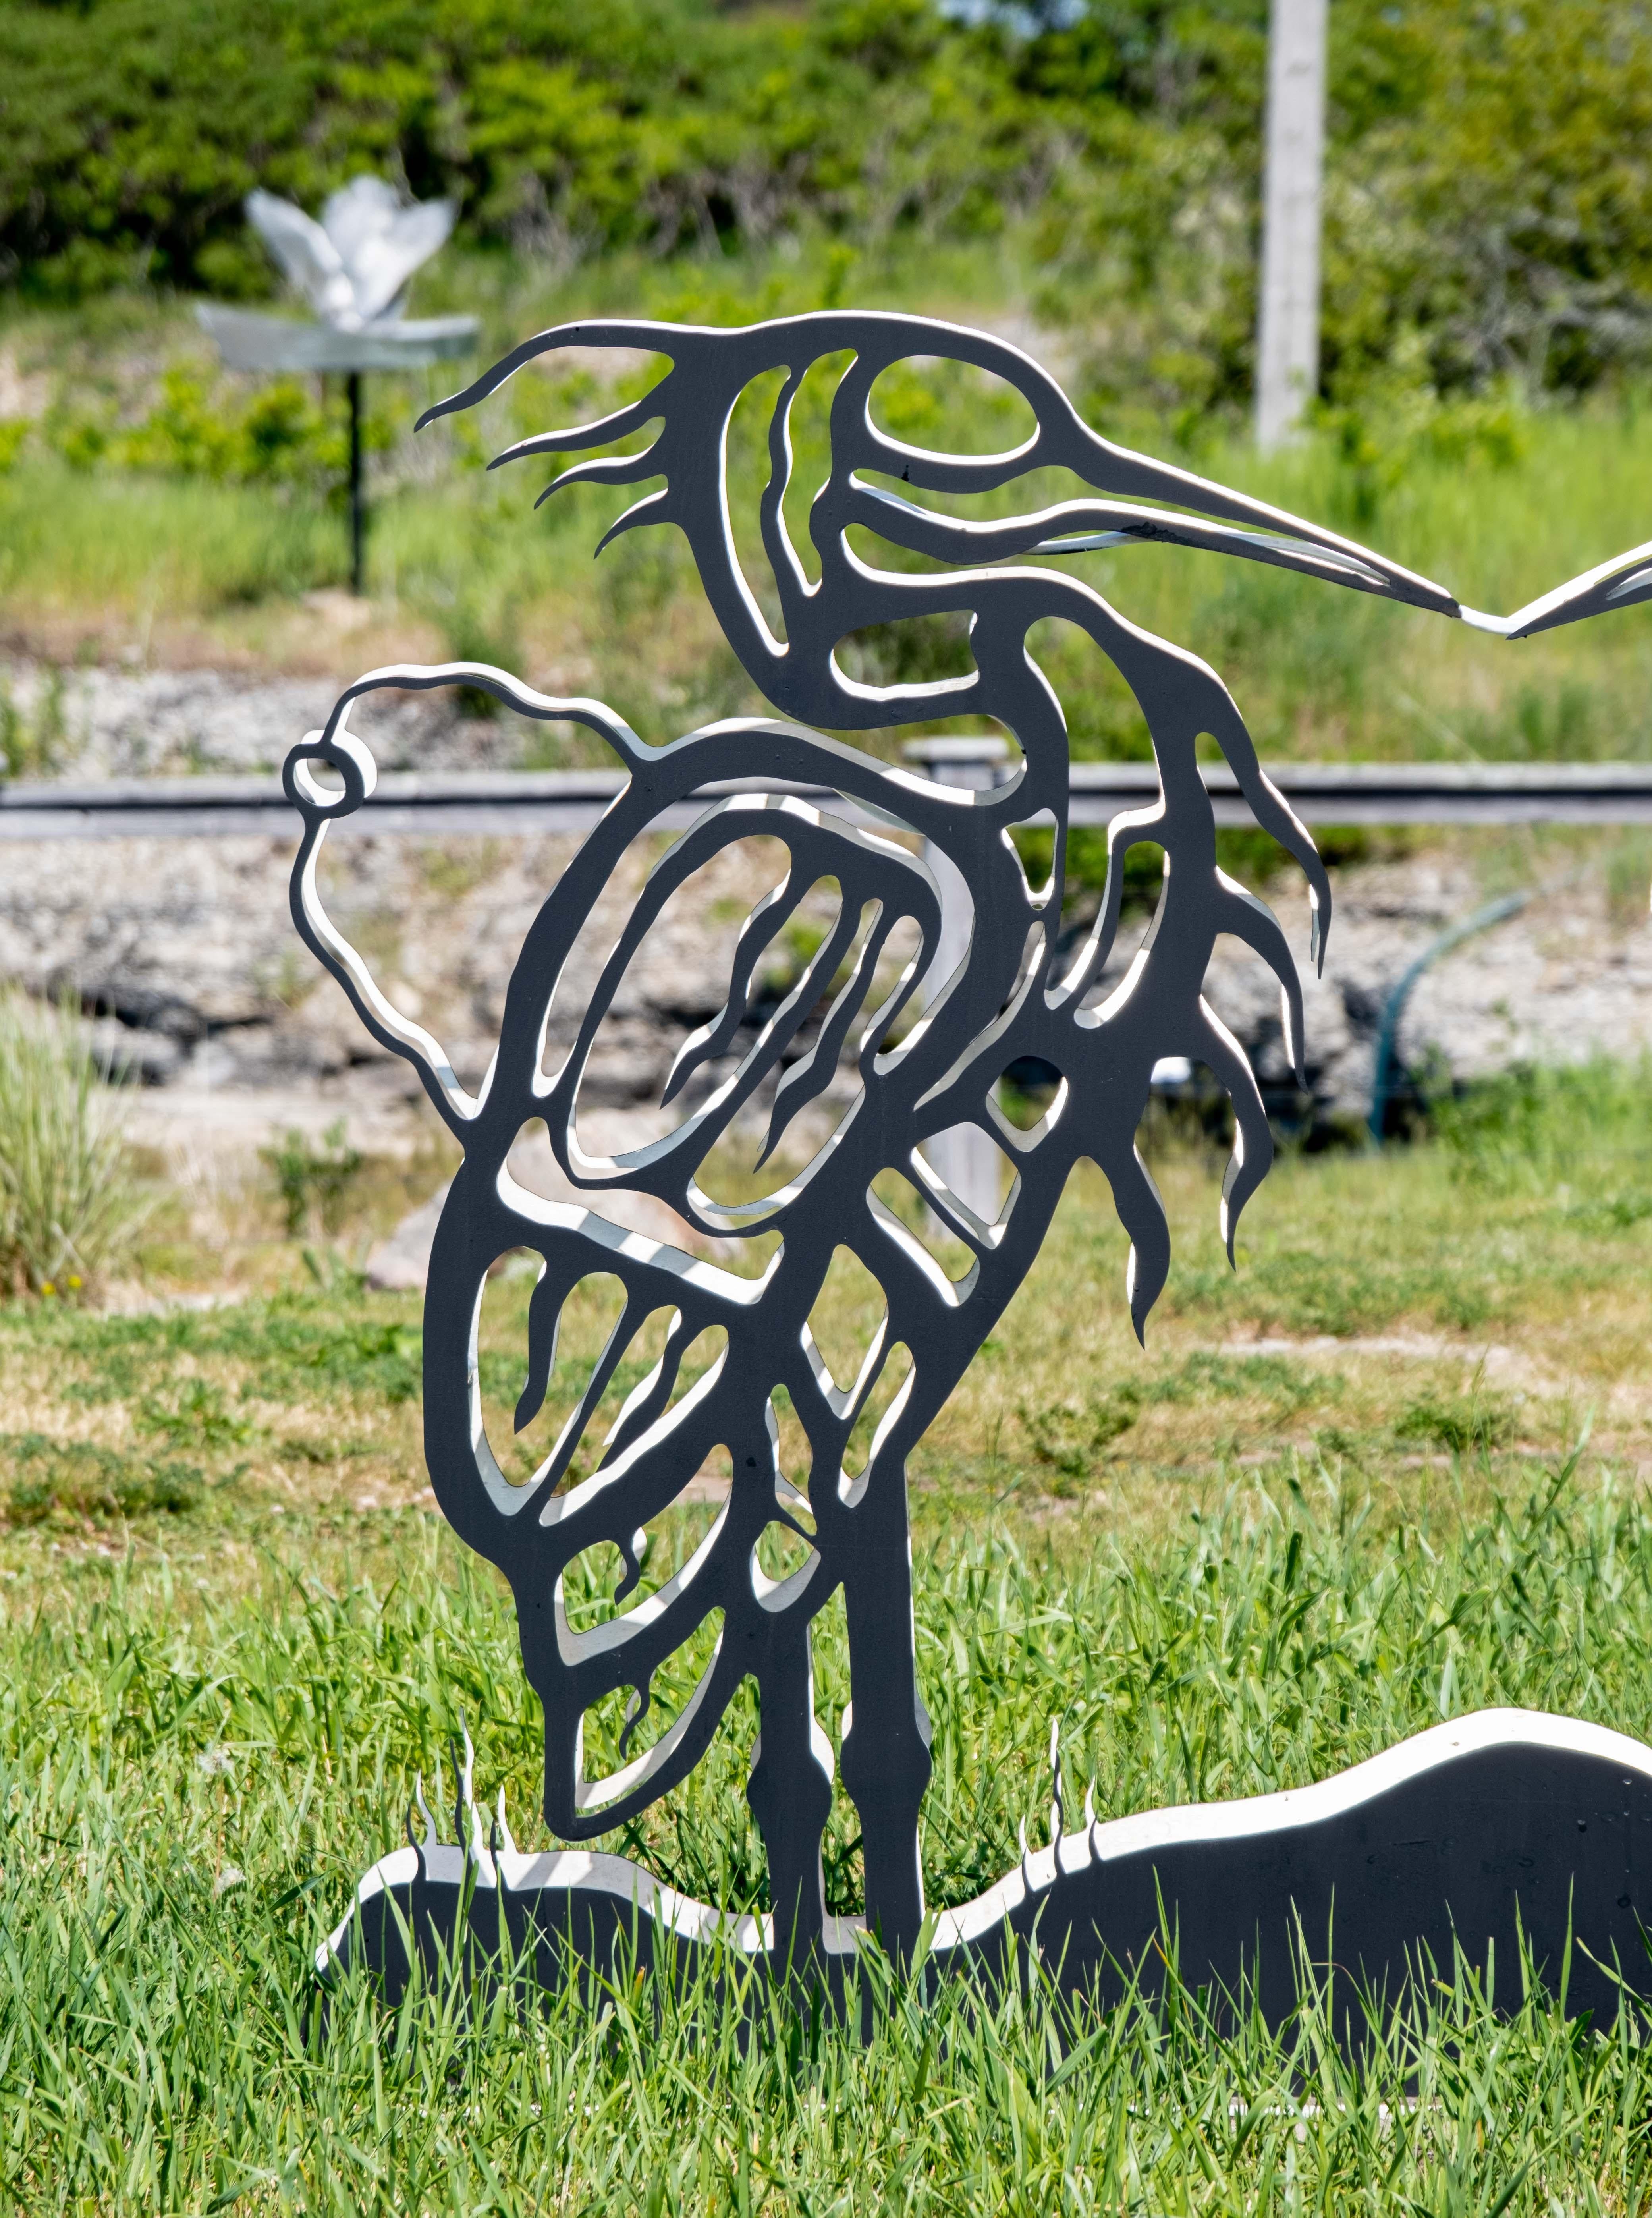 The majesty of woodland birds and animals is celebrated in these striking metal sculptures by the Six Nations Mohawk artist Adam Monture. Monture’s beautiful paintings of woodland animals—the heron, deer, bears, wolves, turtles, and loons were